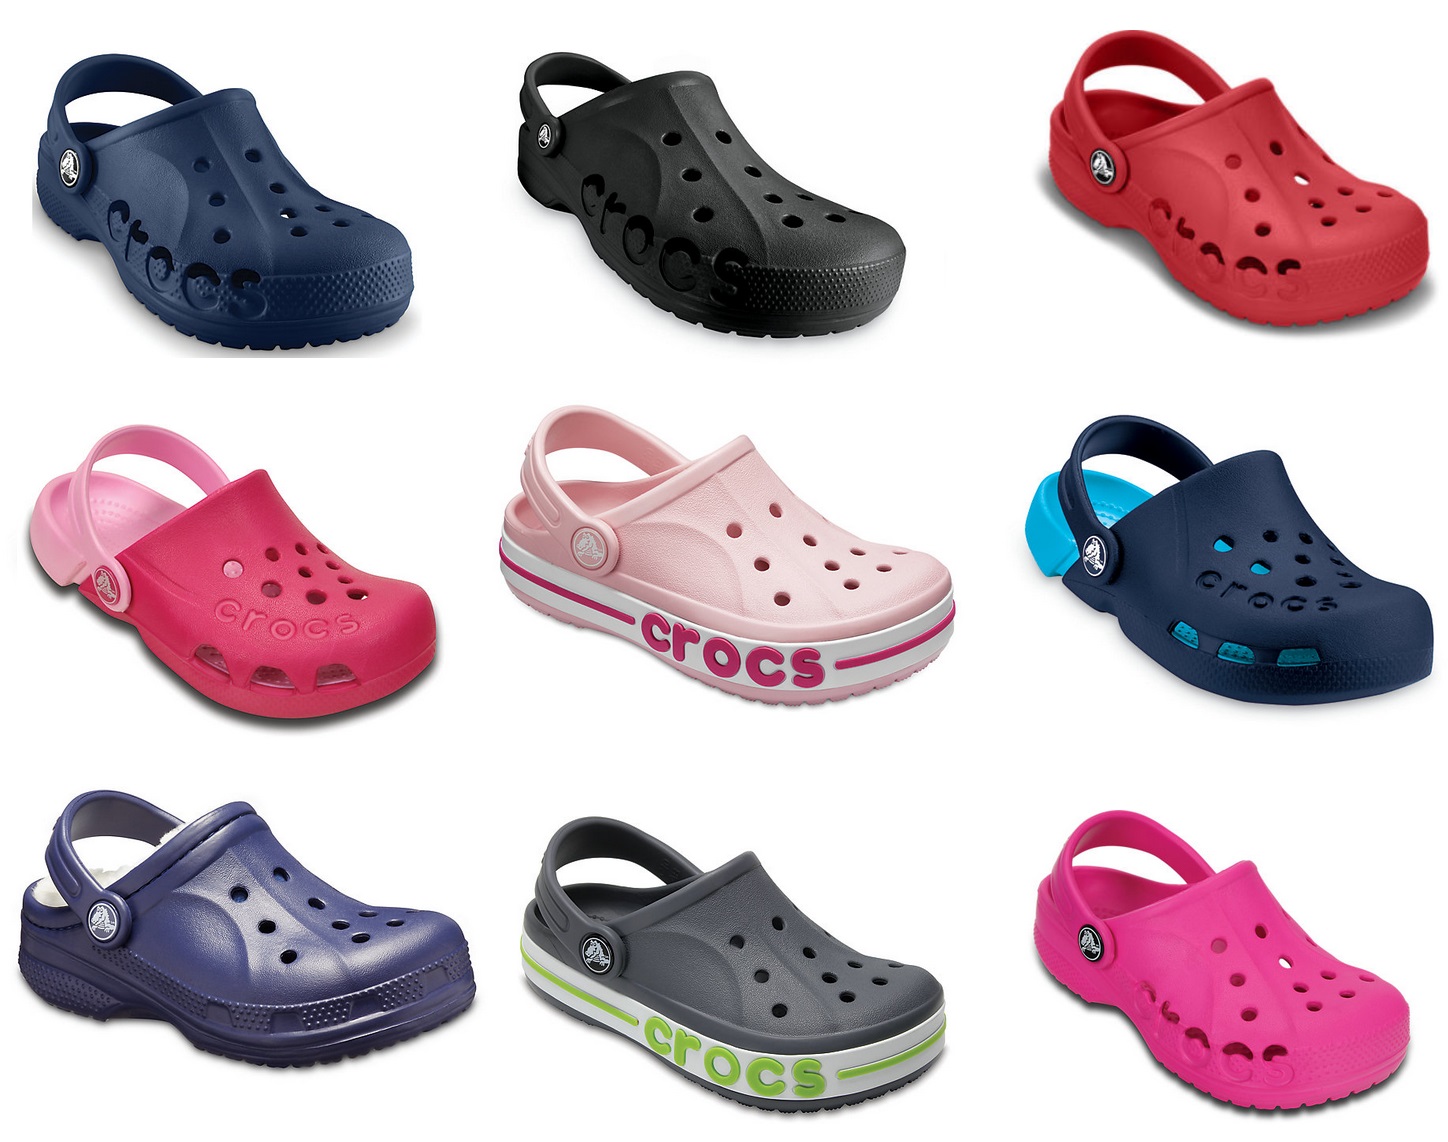 MORE HOT PRICES On Kids & Adult Sized Crocs - Crocs From Just $5.09 A ...